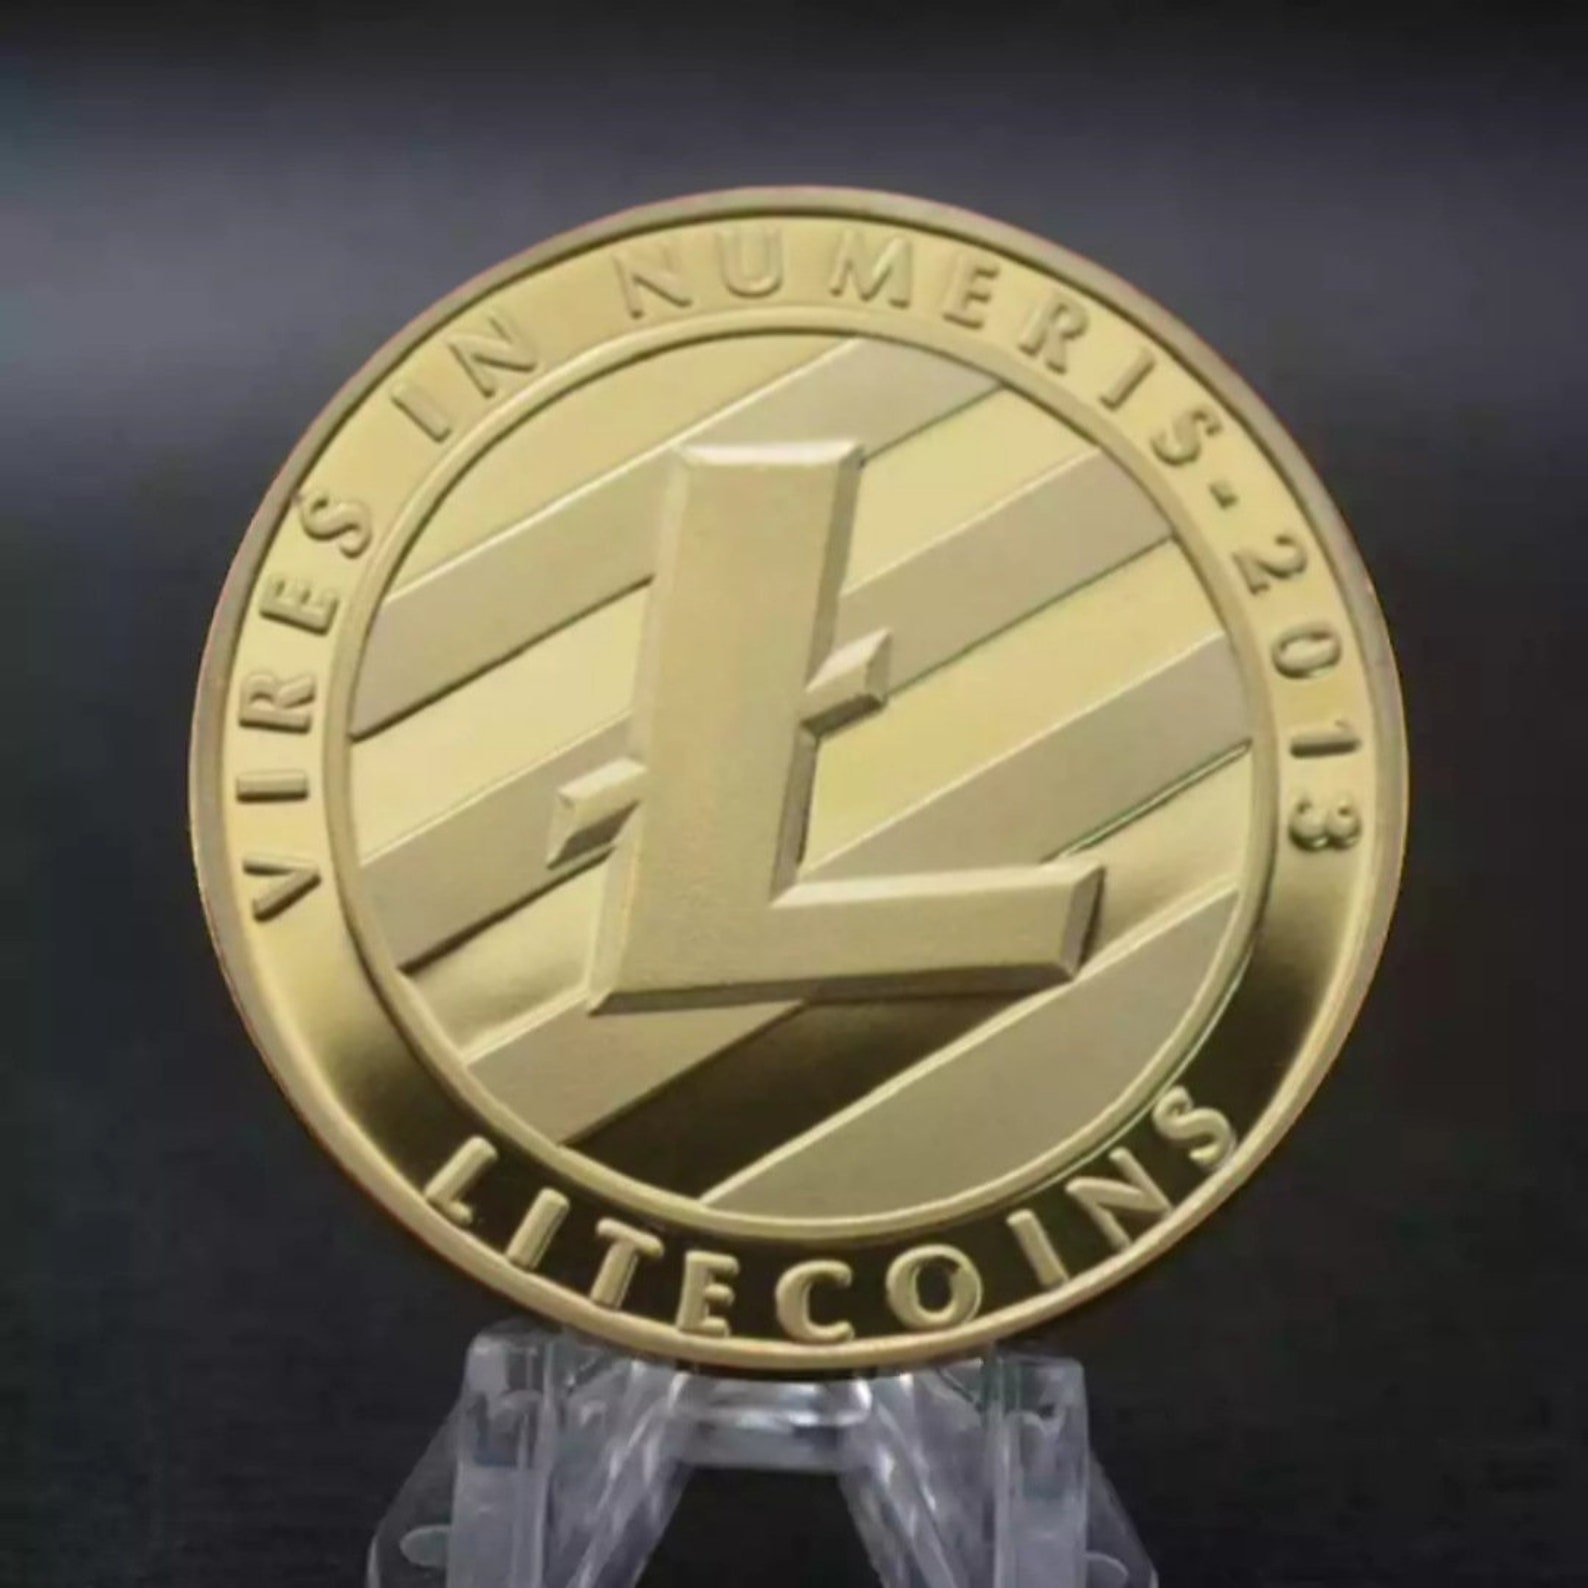 can you trade litecoin for other coins on hitbtc